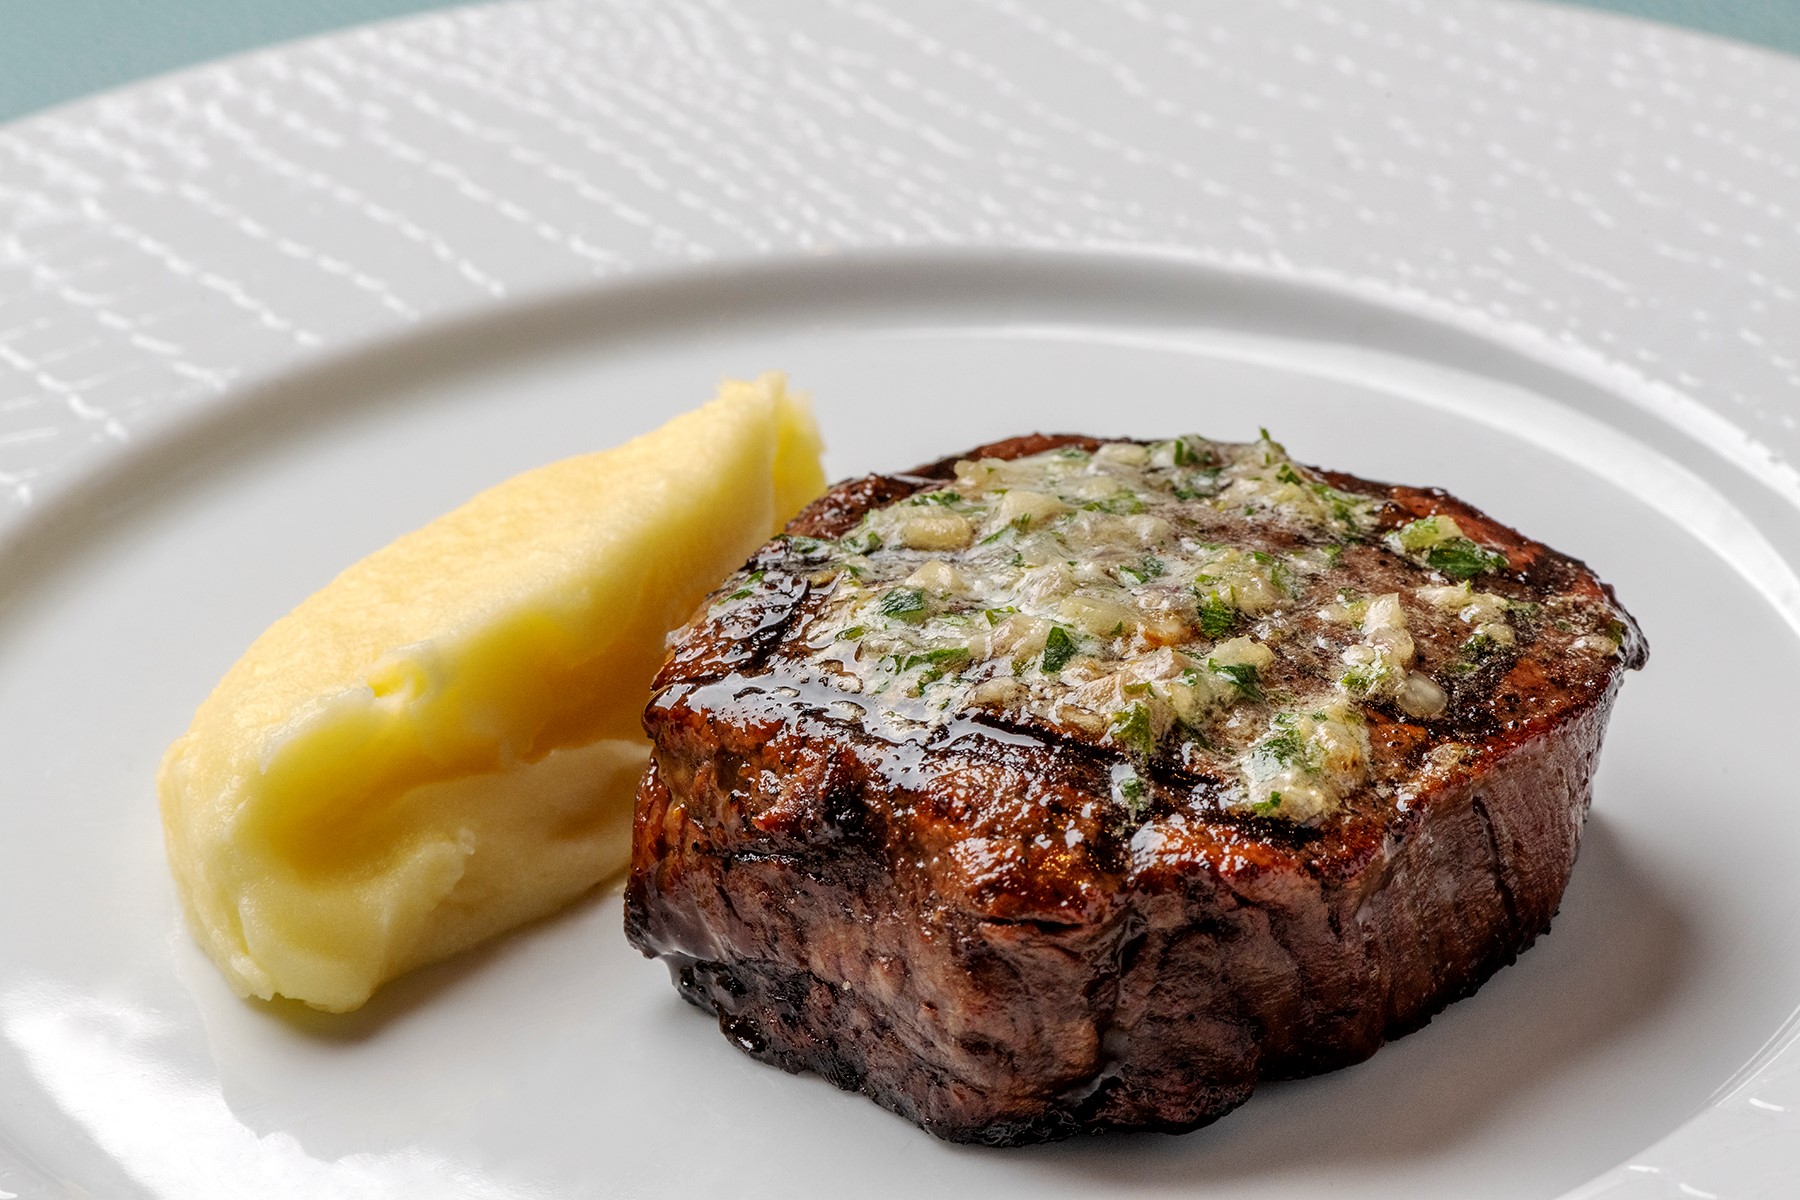 Pan Seared Filet Mignon with Garlic & Herb Compound Butter and